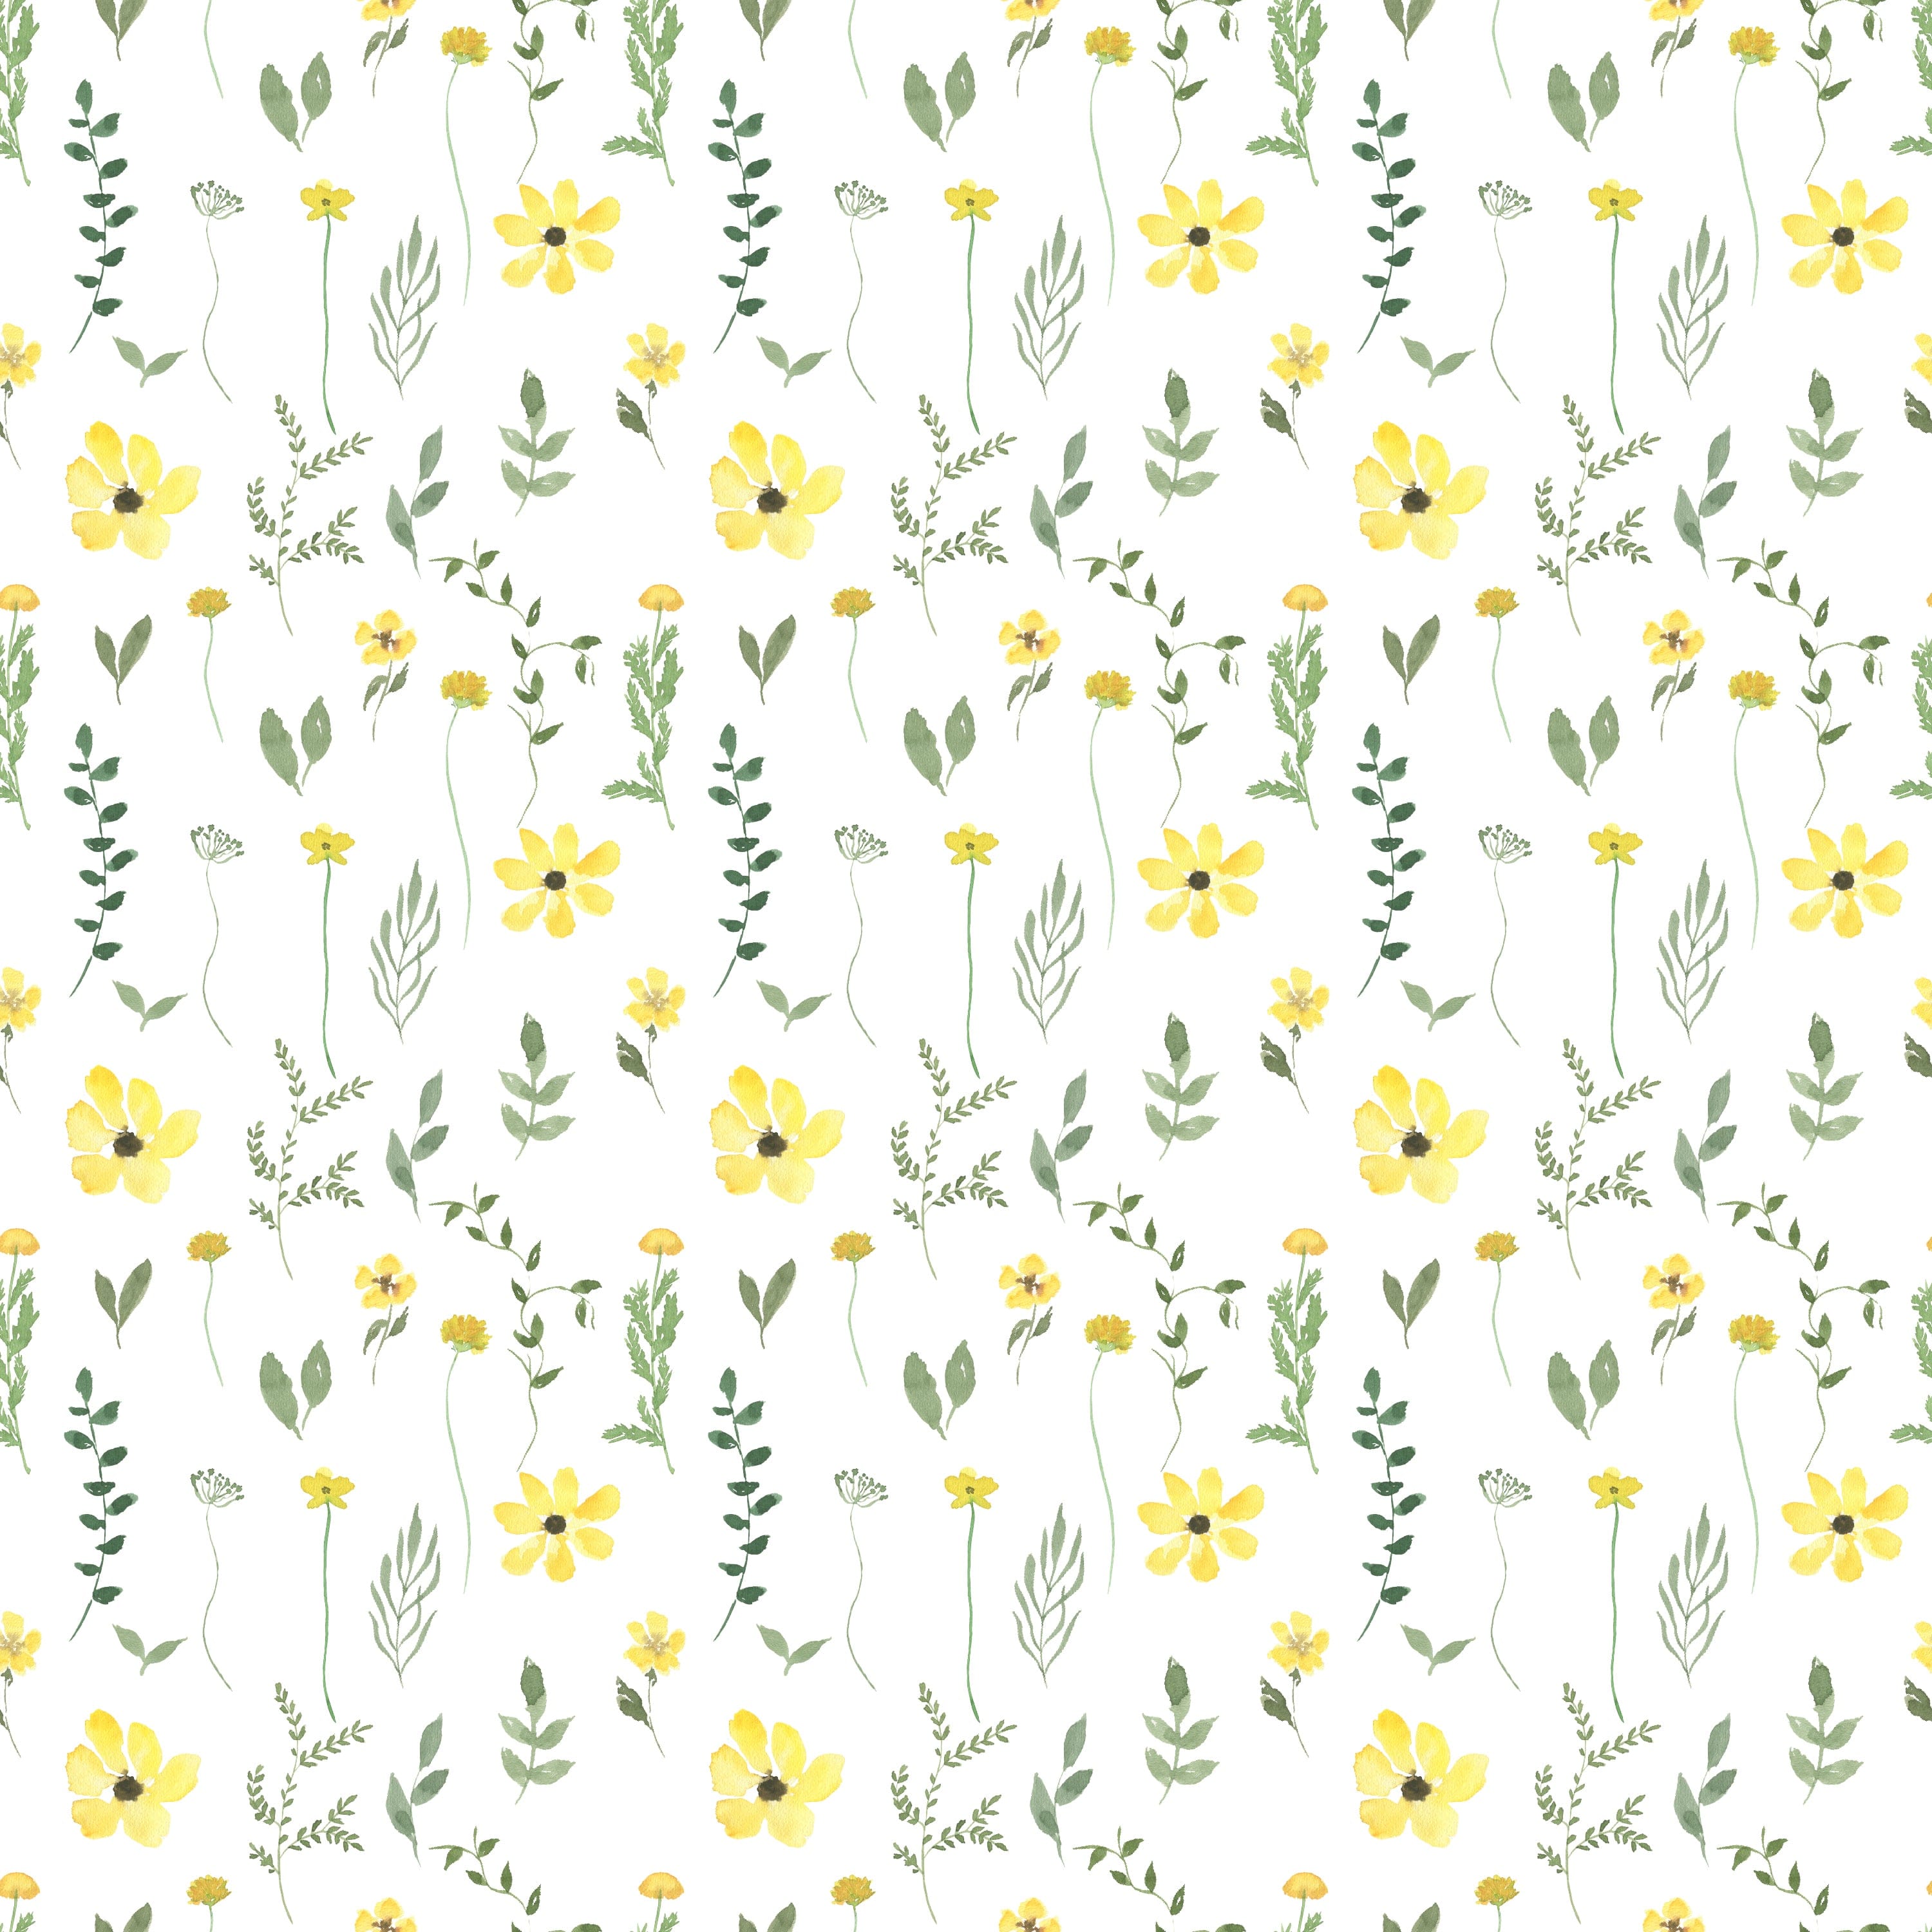 Pattern detail of the Spring Field Wallpaper - V, featuring a delightful watercolor-style design with yellow flowers and green leaves on a white background